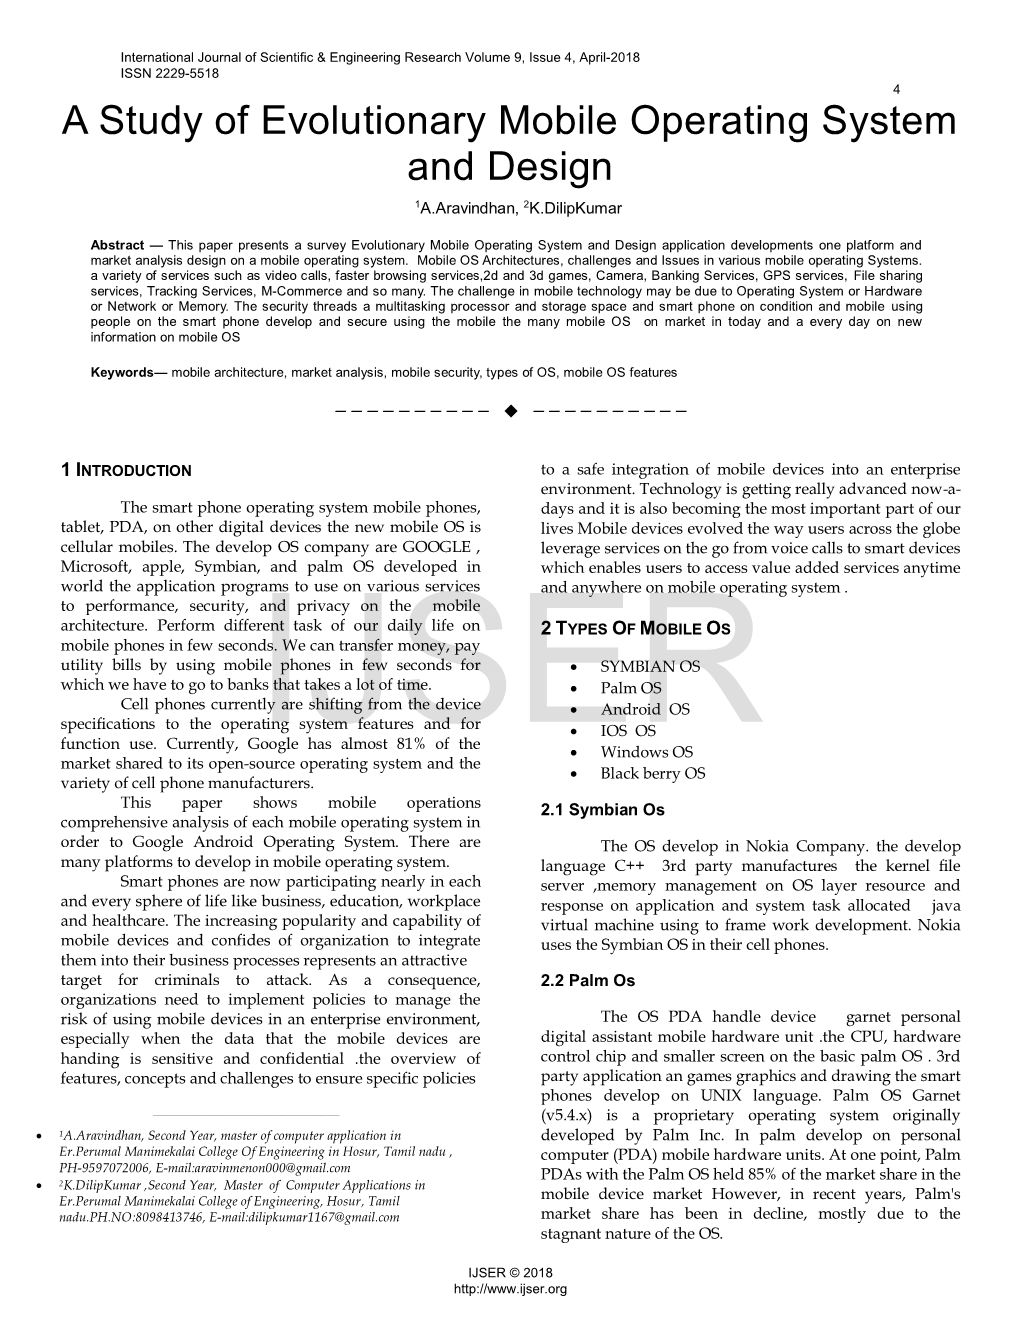 A Study of Evolutionary Mobile Operating System and Design